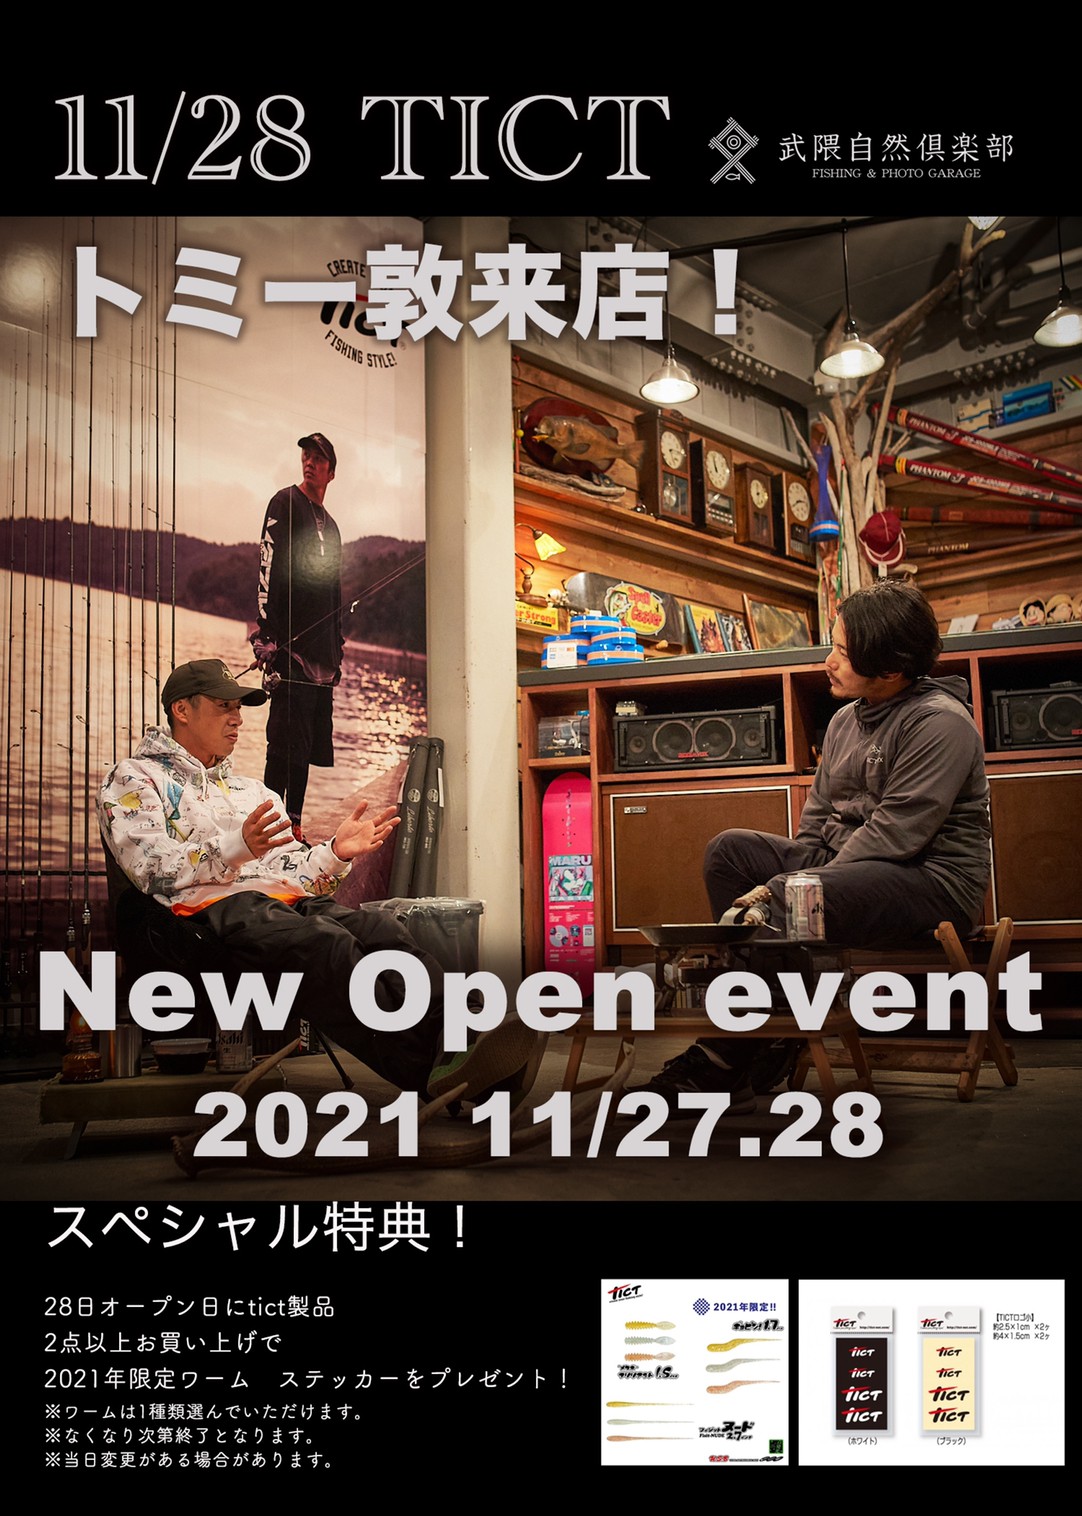 NEW　Open Event　トミー敦来店！